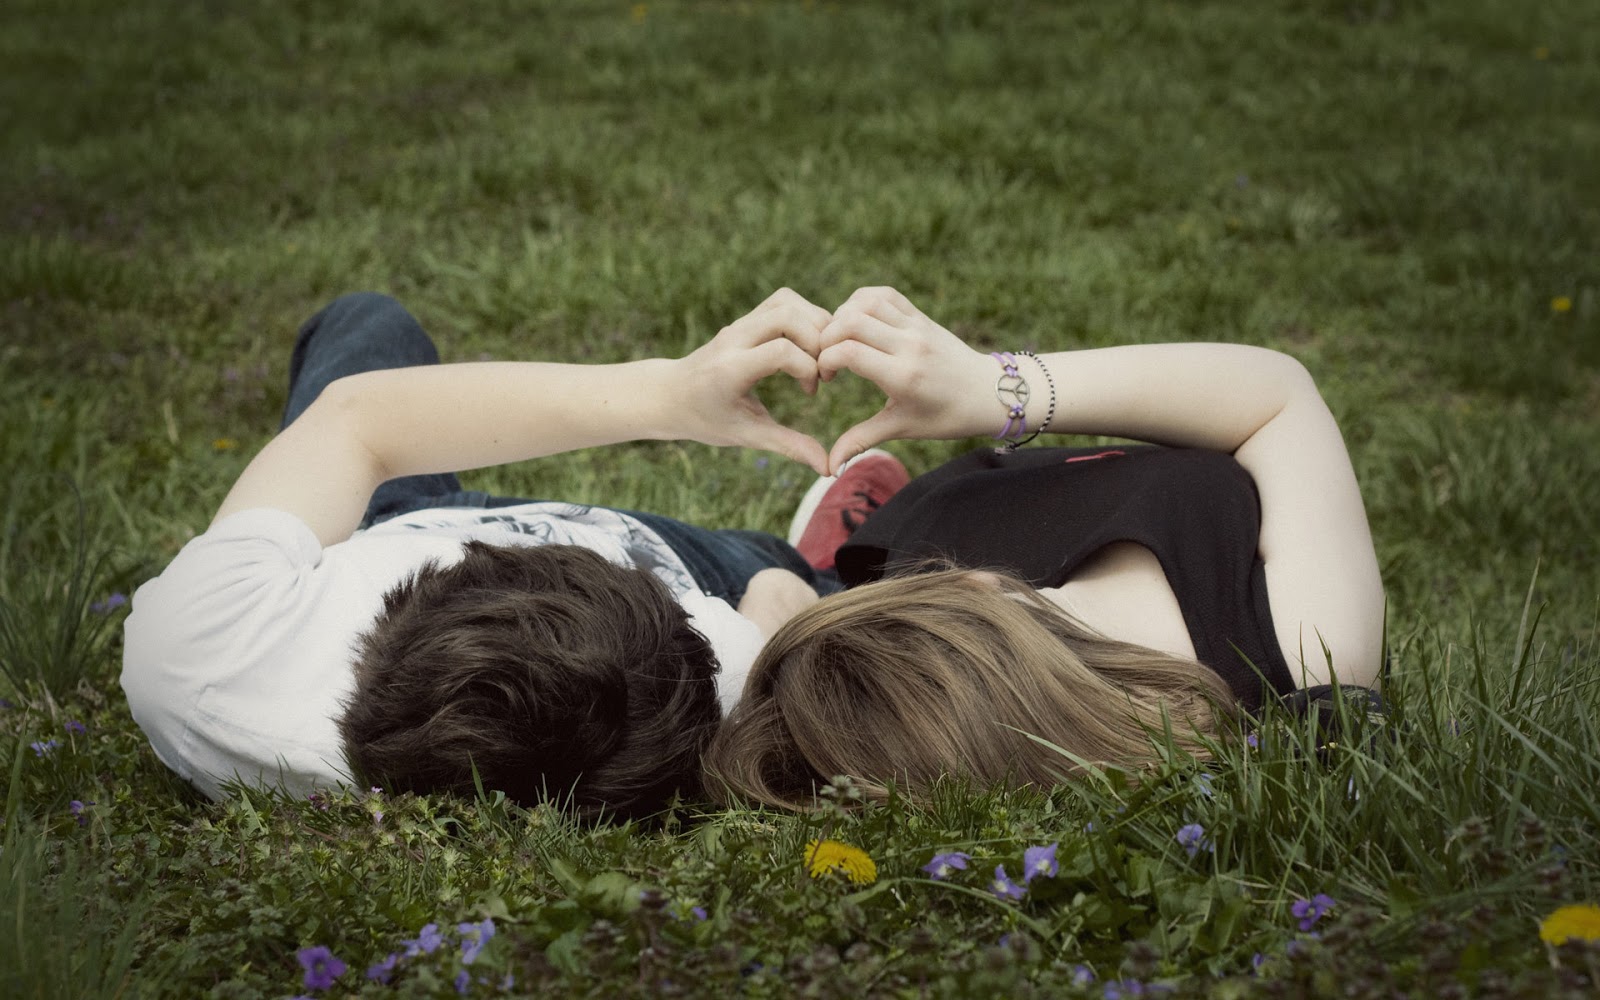 sweet couple wallpaper,people in nature,grass,photograph,romance,fun